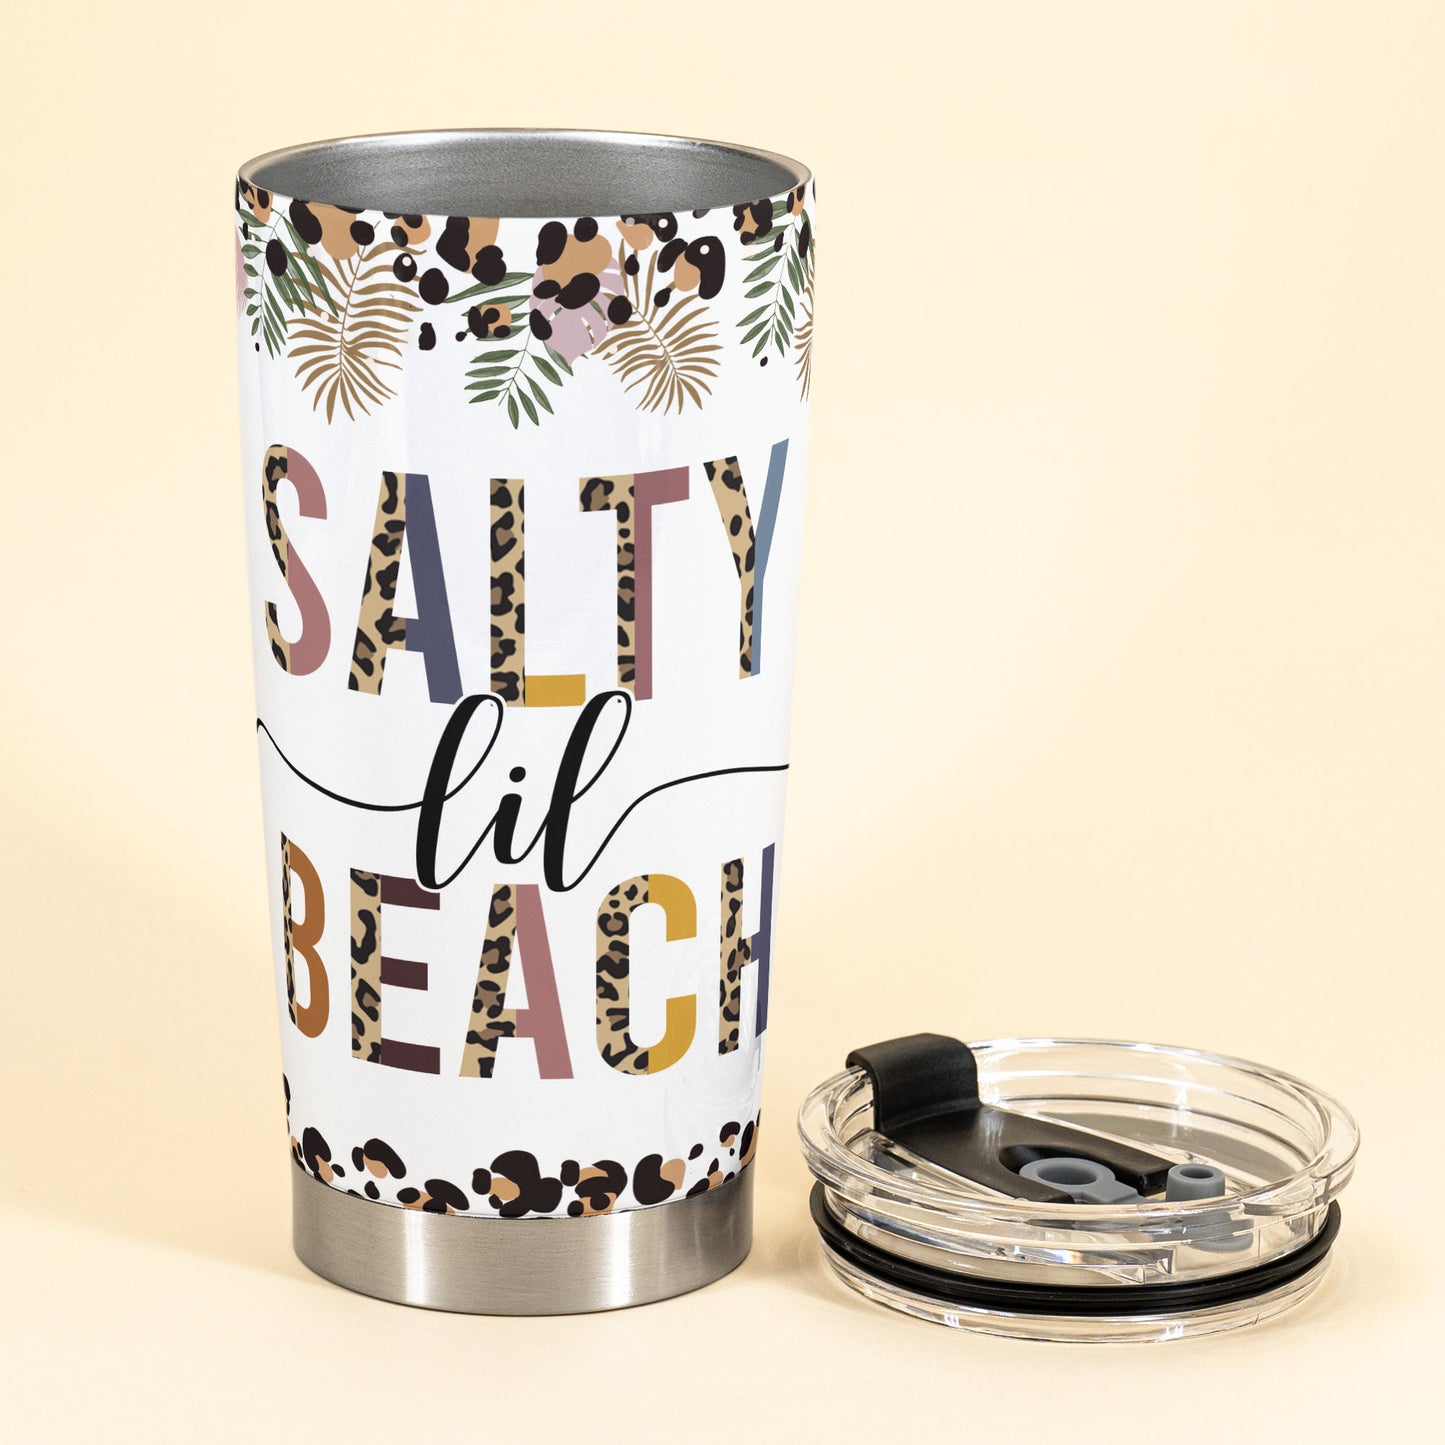 Salty Lil Beach - Personalized Tumbler - Summer, Birthday Gift For Bestie, Friend, Woman